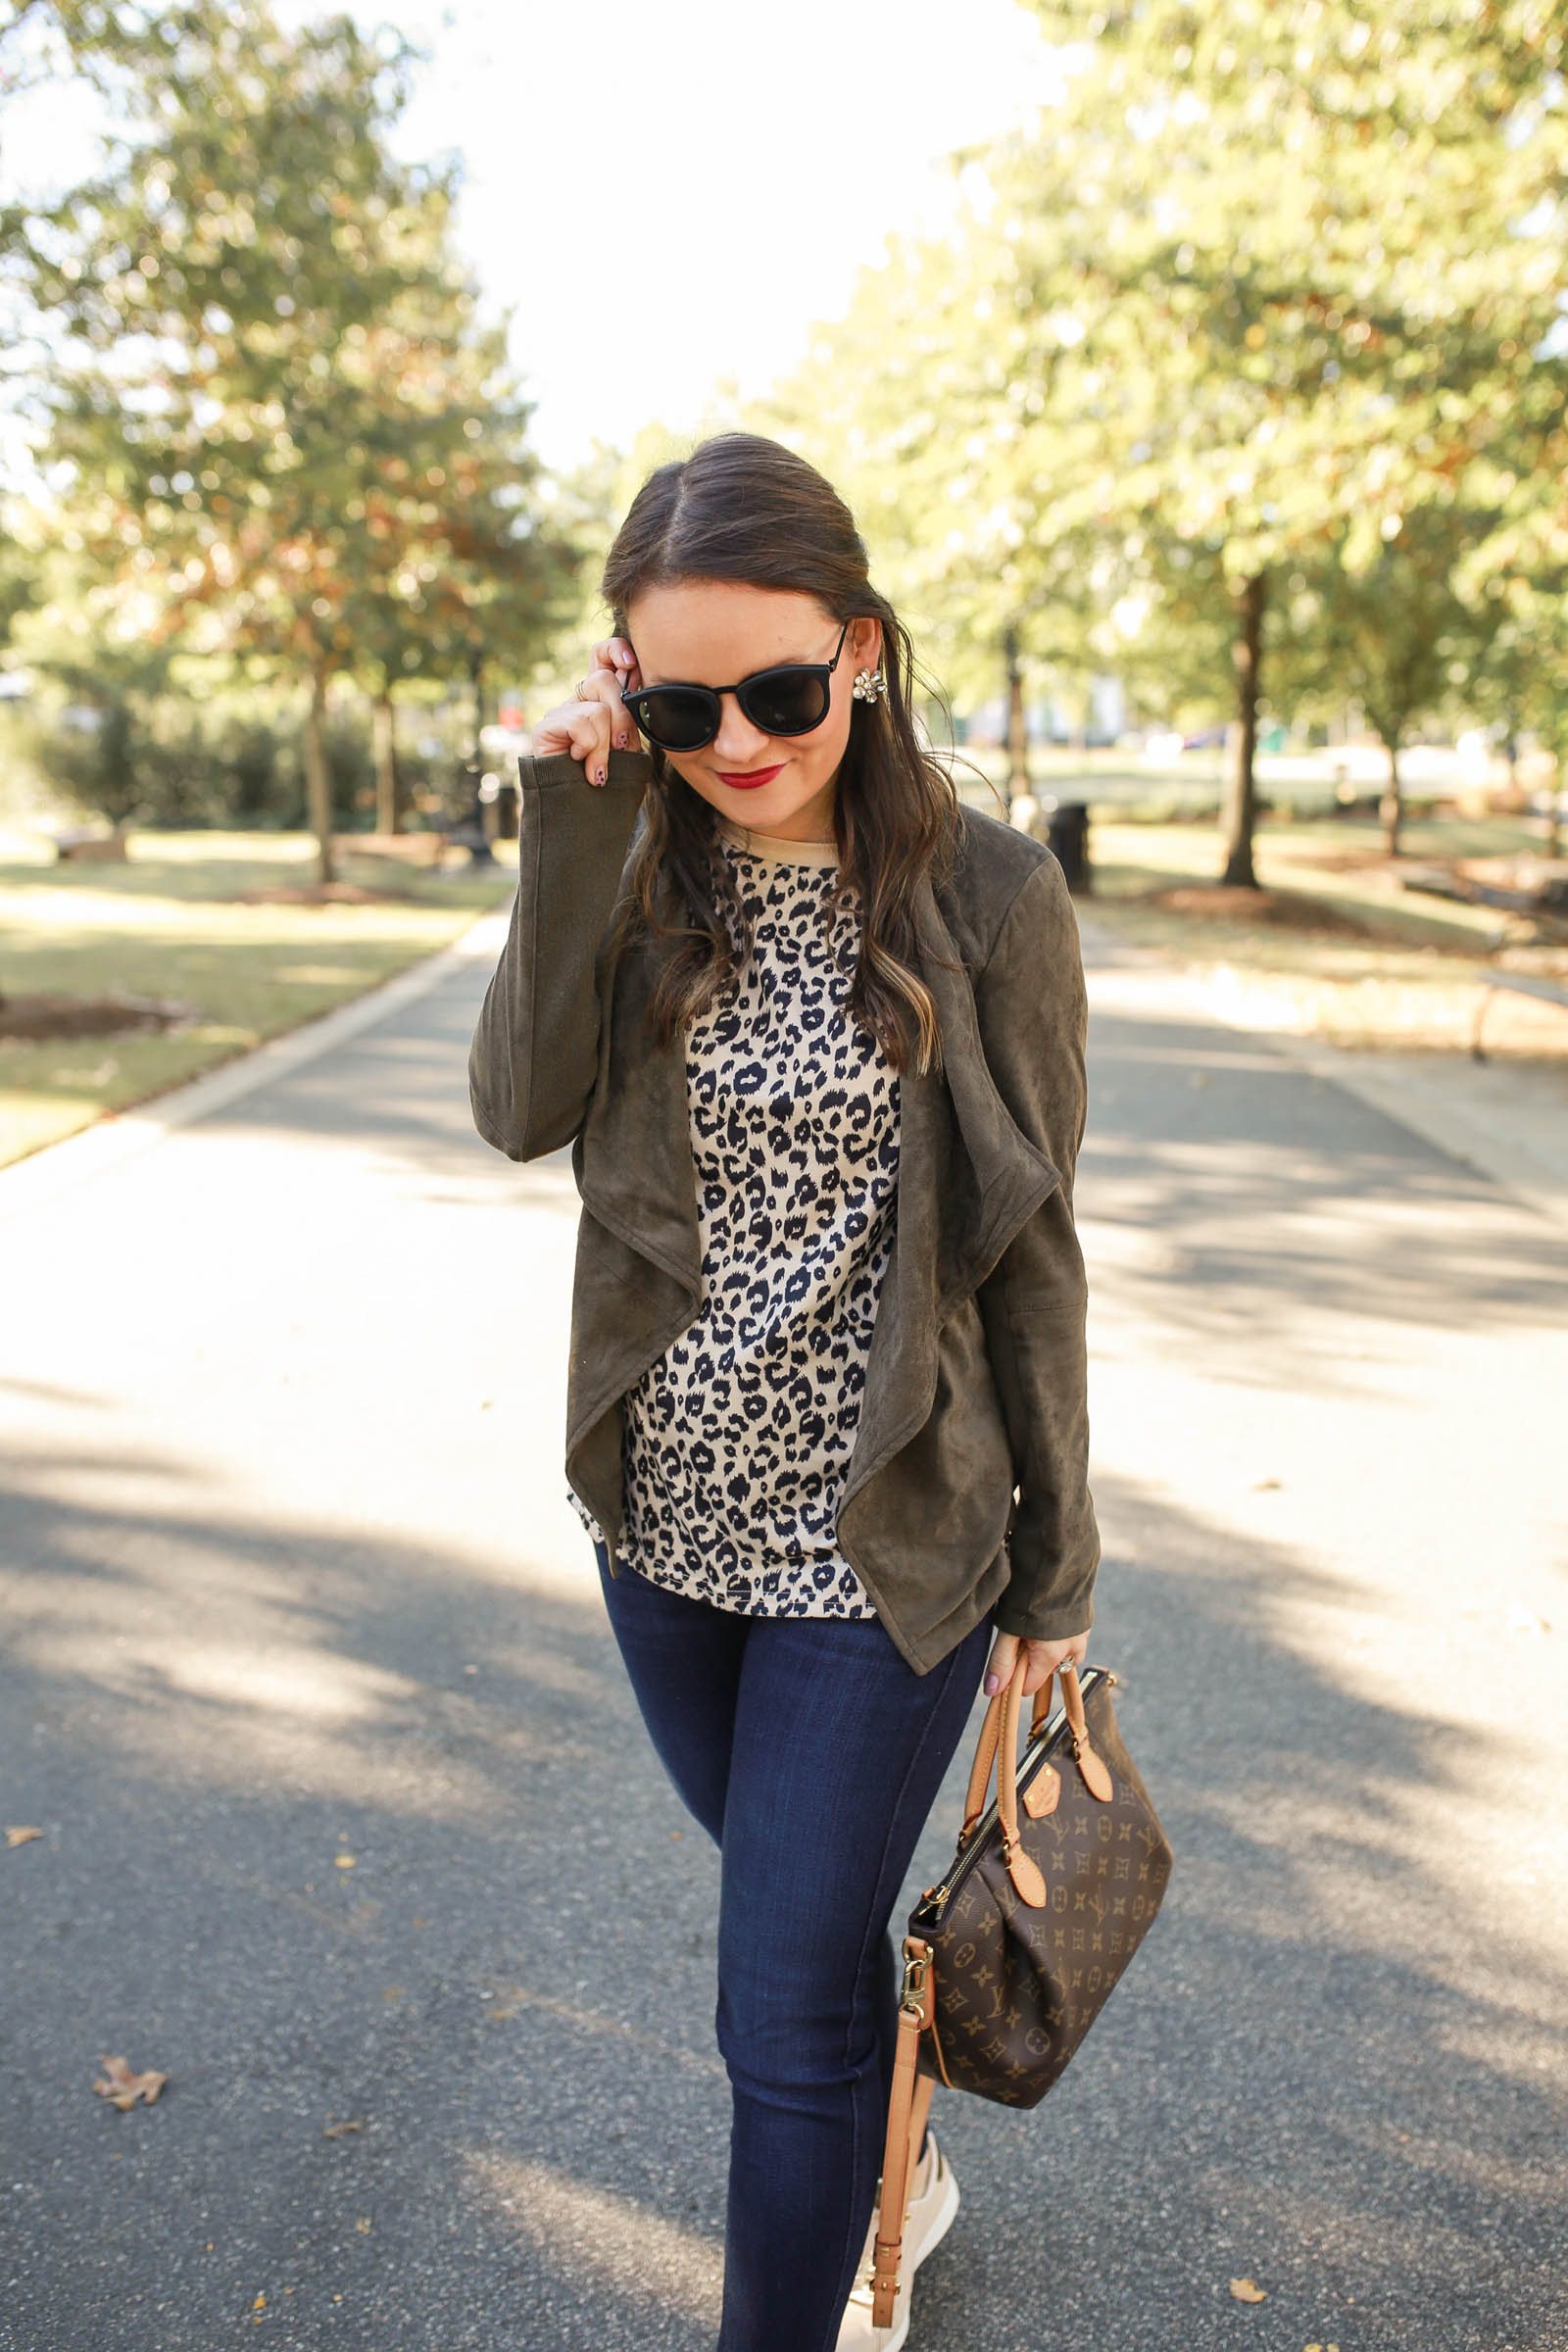 Spanx Leopard Print Faux Leather Leggings Brown - $60 - From Katie